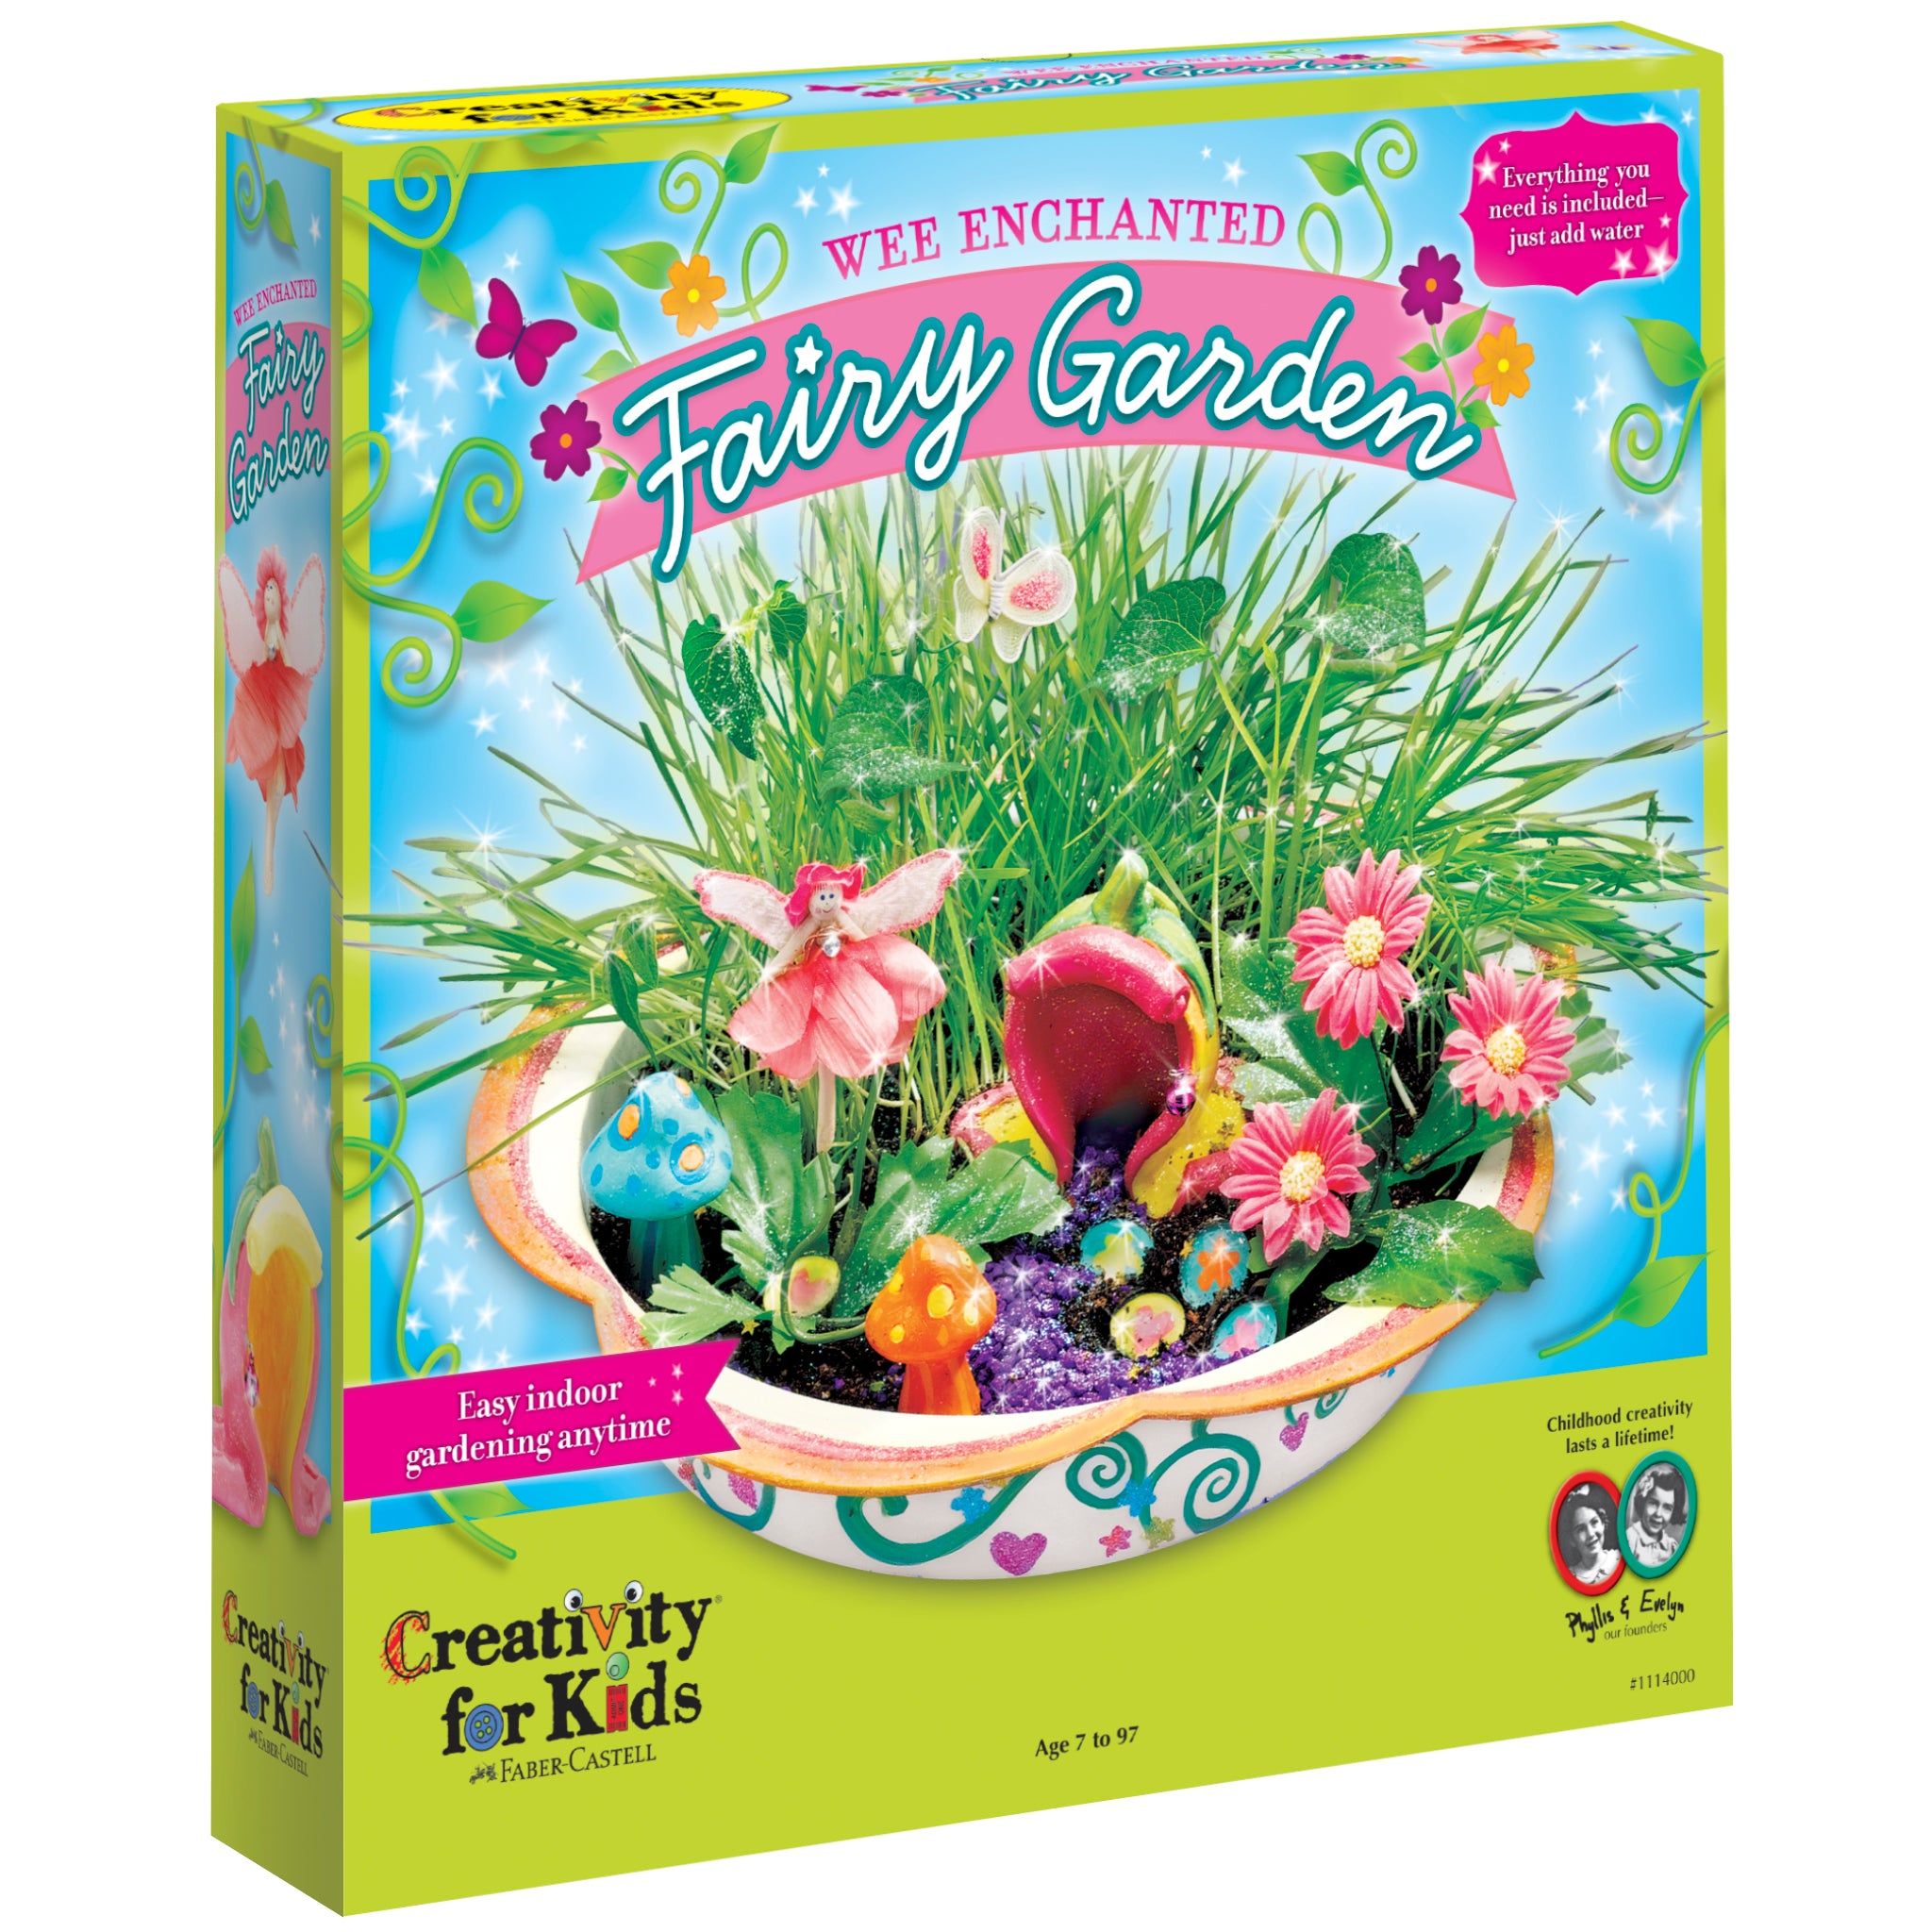 Product box with displaying image of fairy garden. Green grass, ceramic mushrooms, fake flowers, fairy house and fairy. 